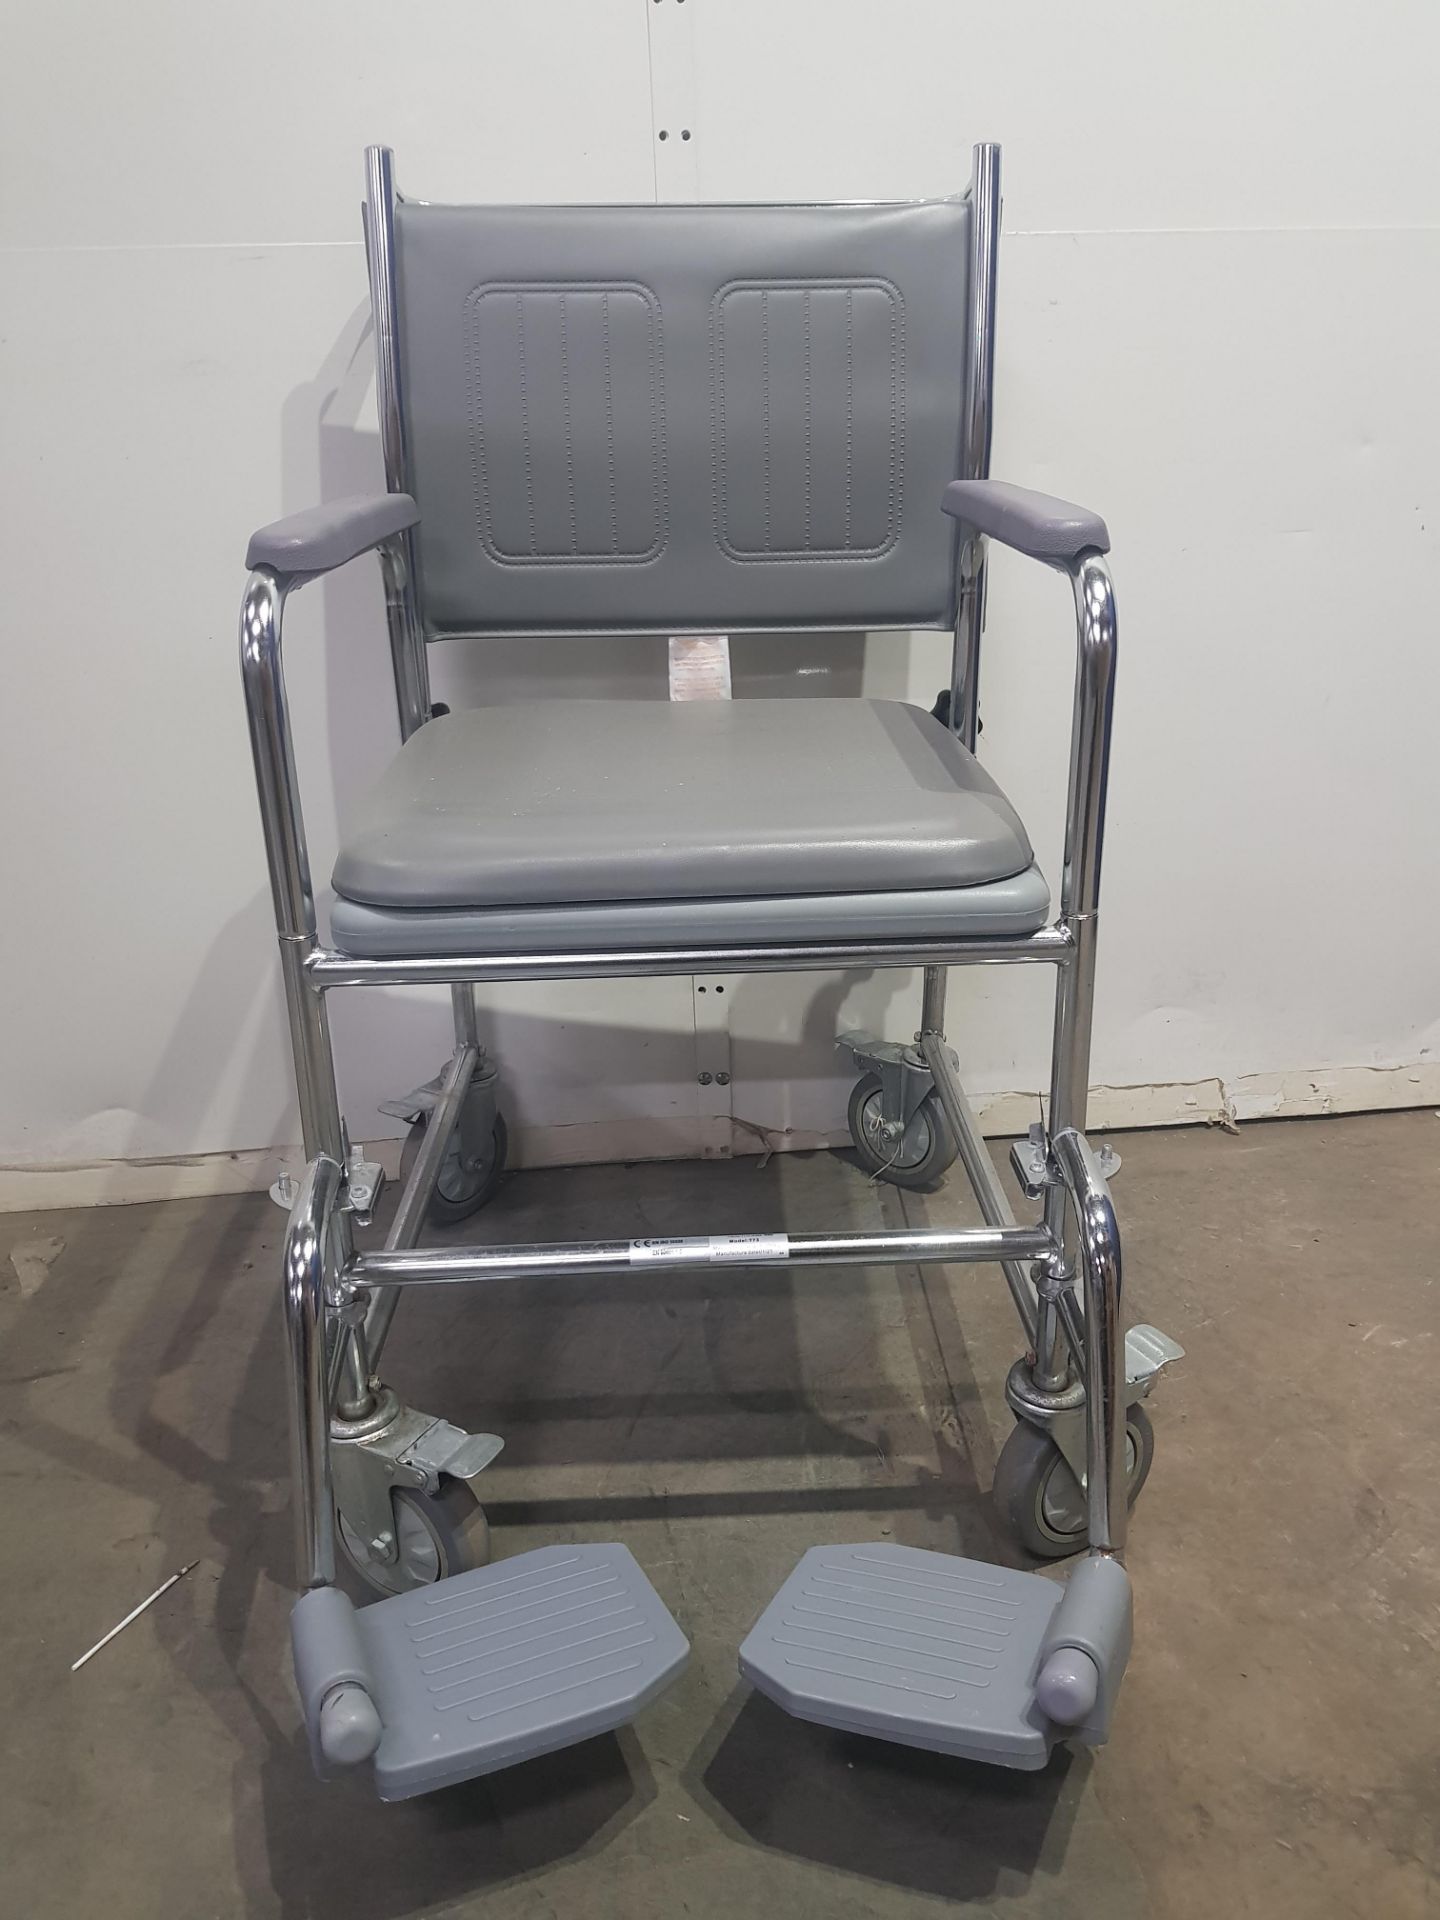 Cefindy Toilet Chair, Height Adjustable